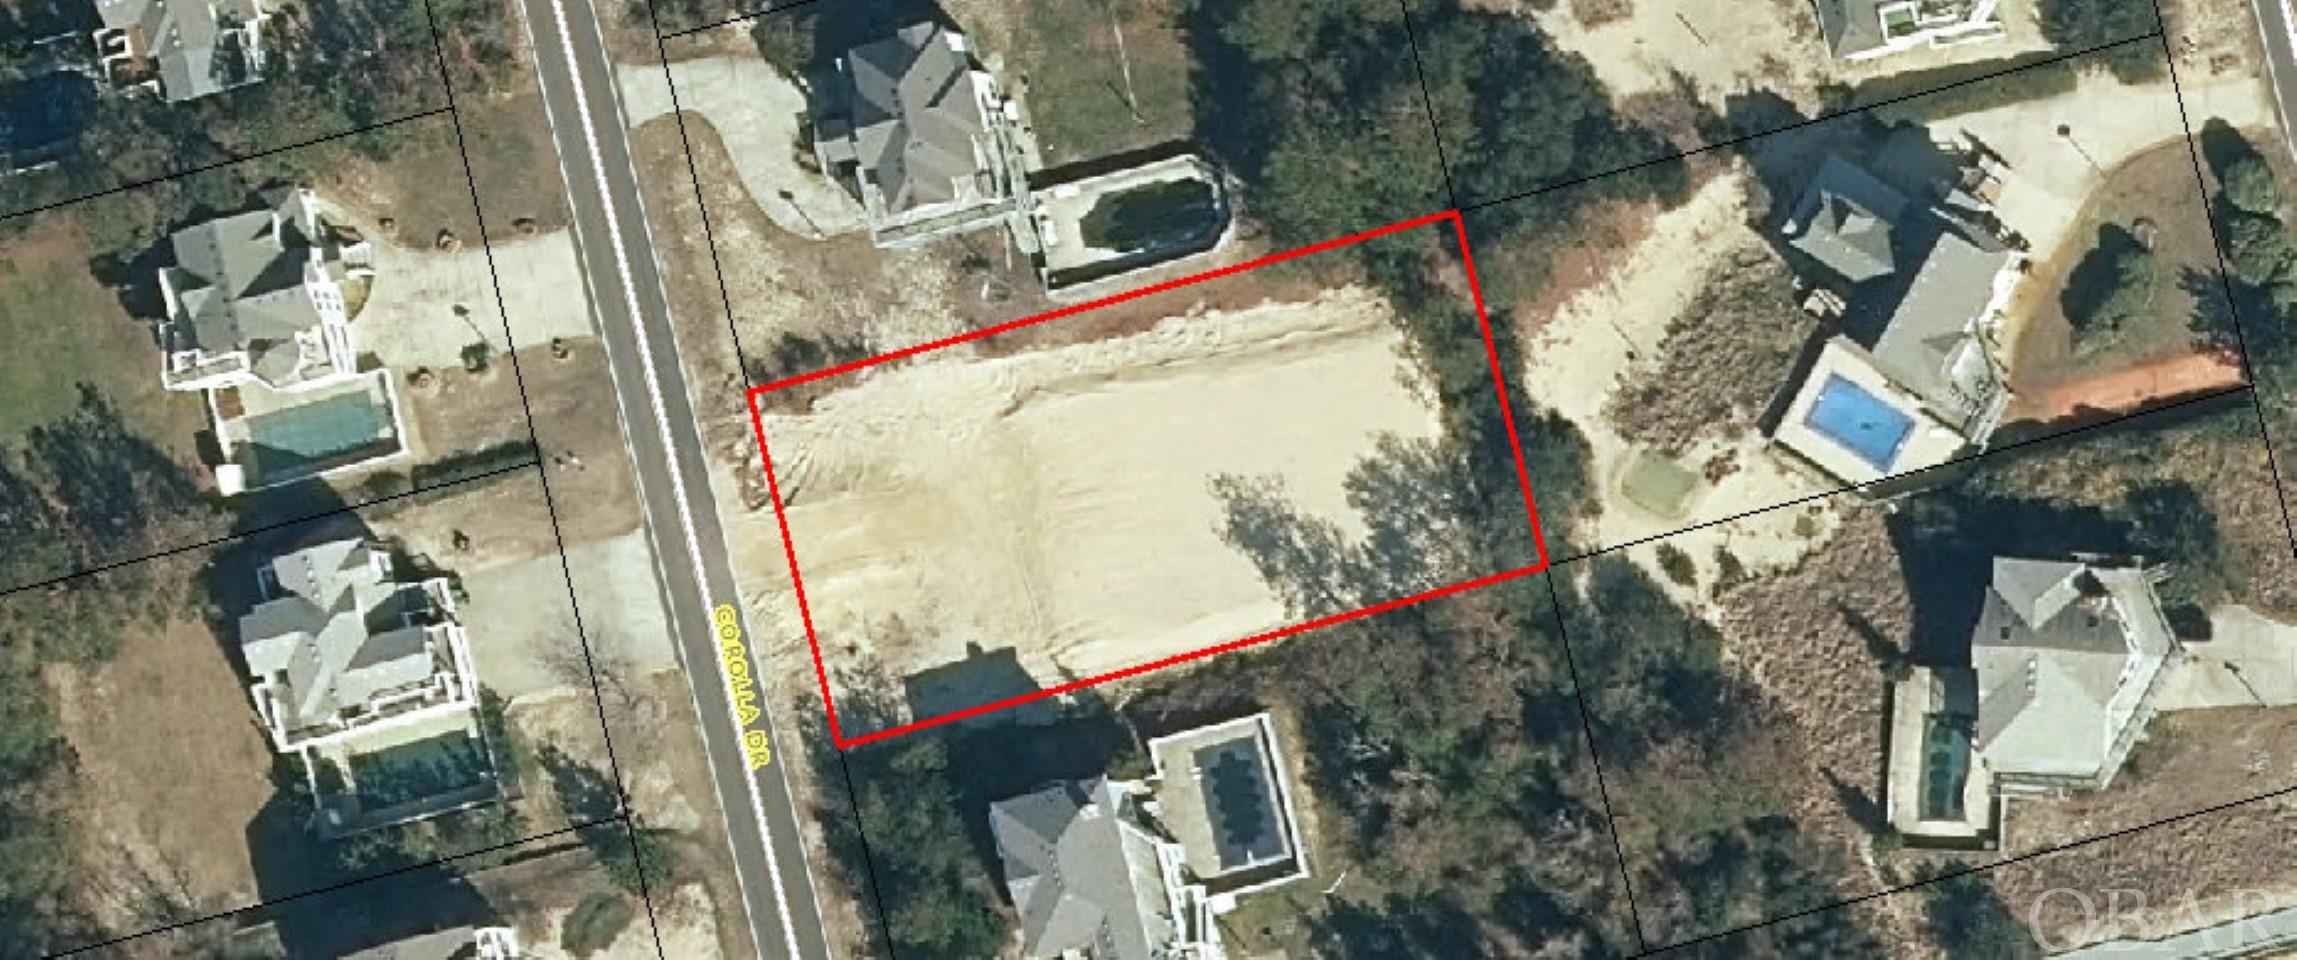 Fantastic Whalehead 5th row lot already cleared, house pad filled, and stabilized.  This 20,000 sq ft lot is ready to go.  Just one lot away from walkway directly to the beach!  This one is a must see for those ready to build! X Flood Zone!